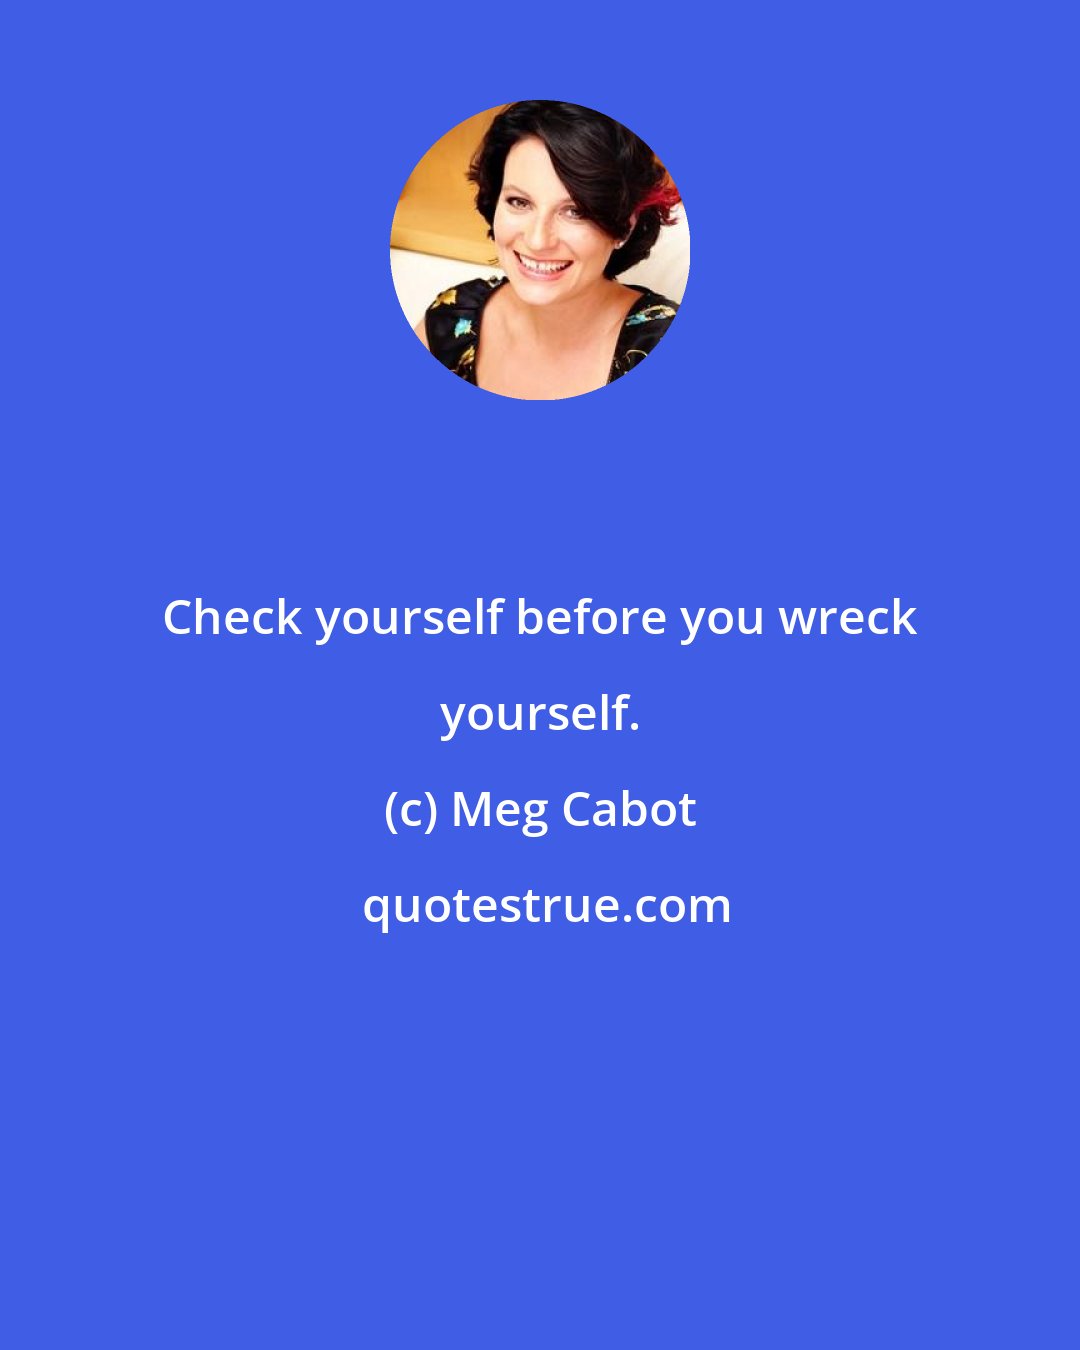 Meg Cabot: Check yourself before you wreck yourself.